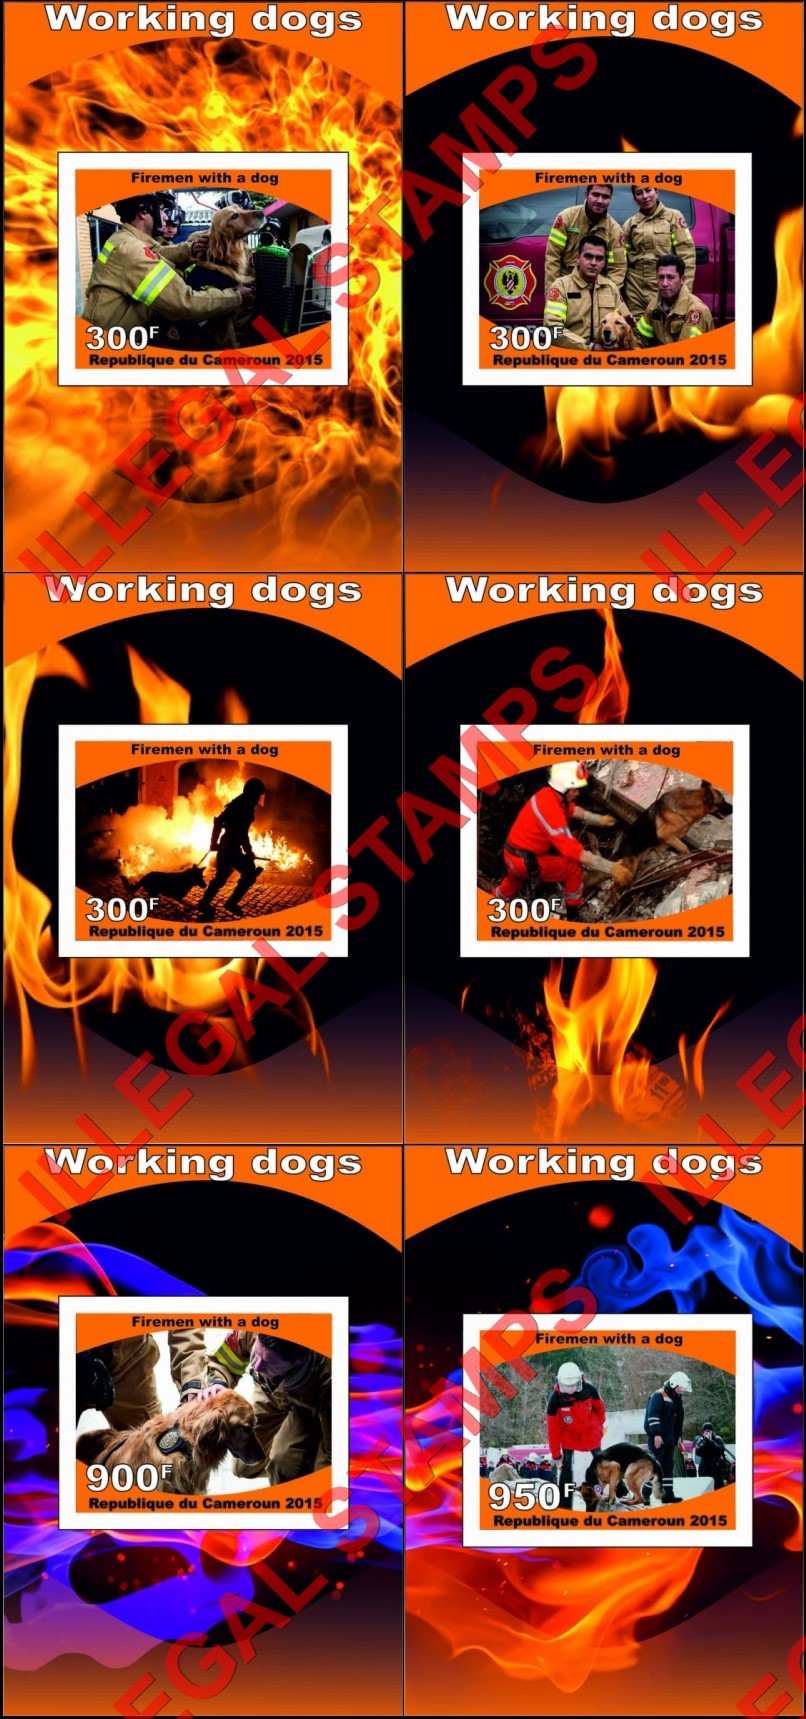 Comoro Islands 2015 Working Dogs Firemen with a Dog Counterfeit Illegal Stamp Souvenir Sheets of 1